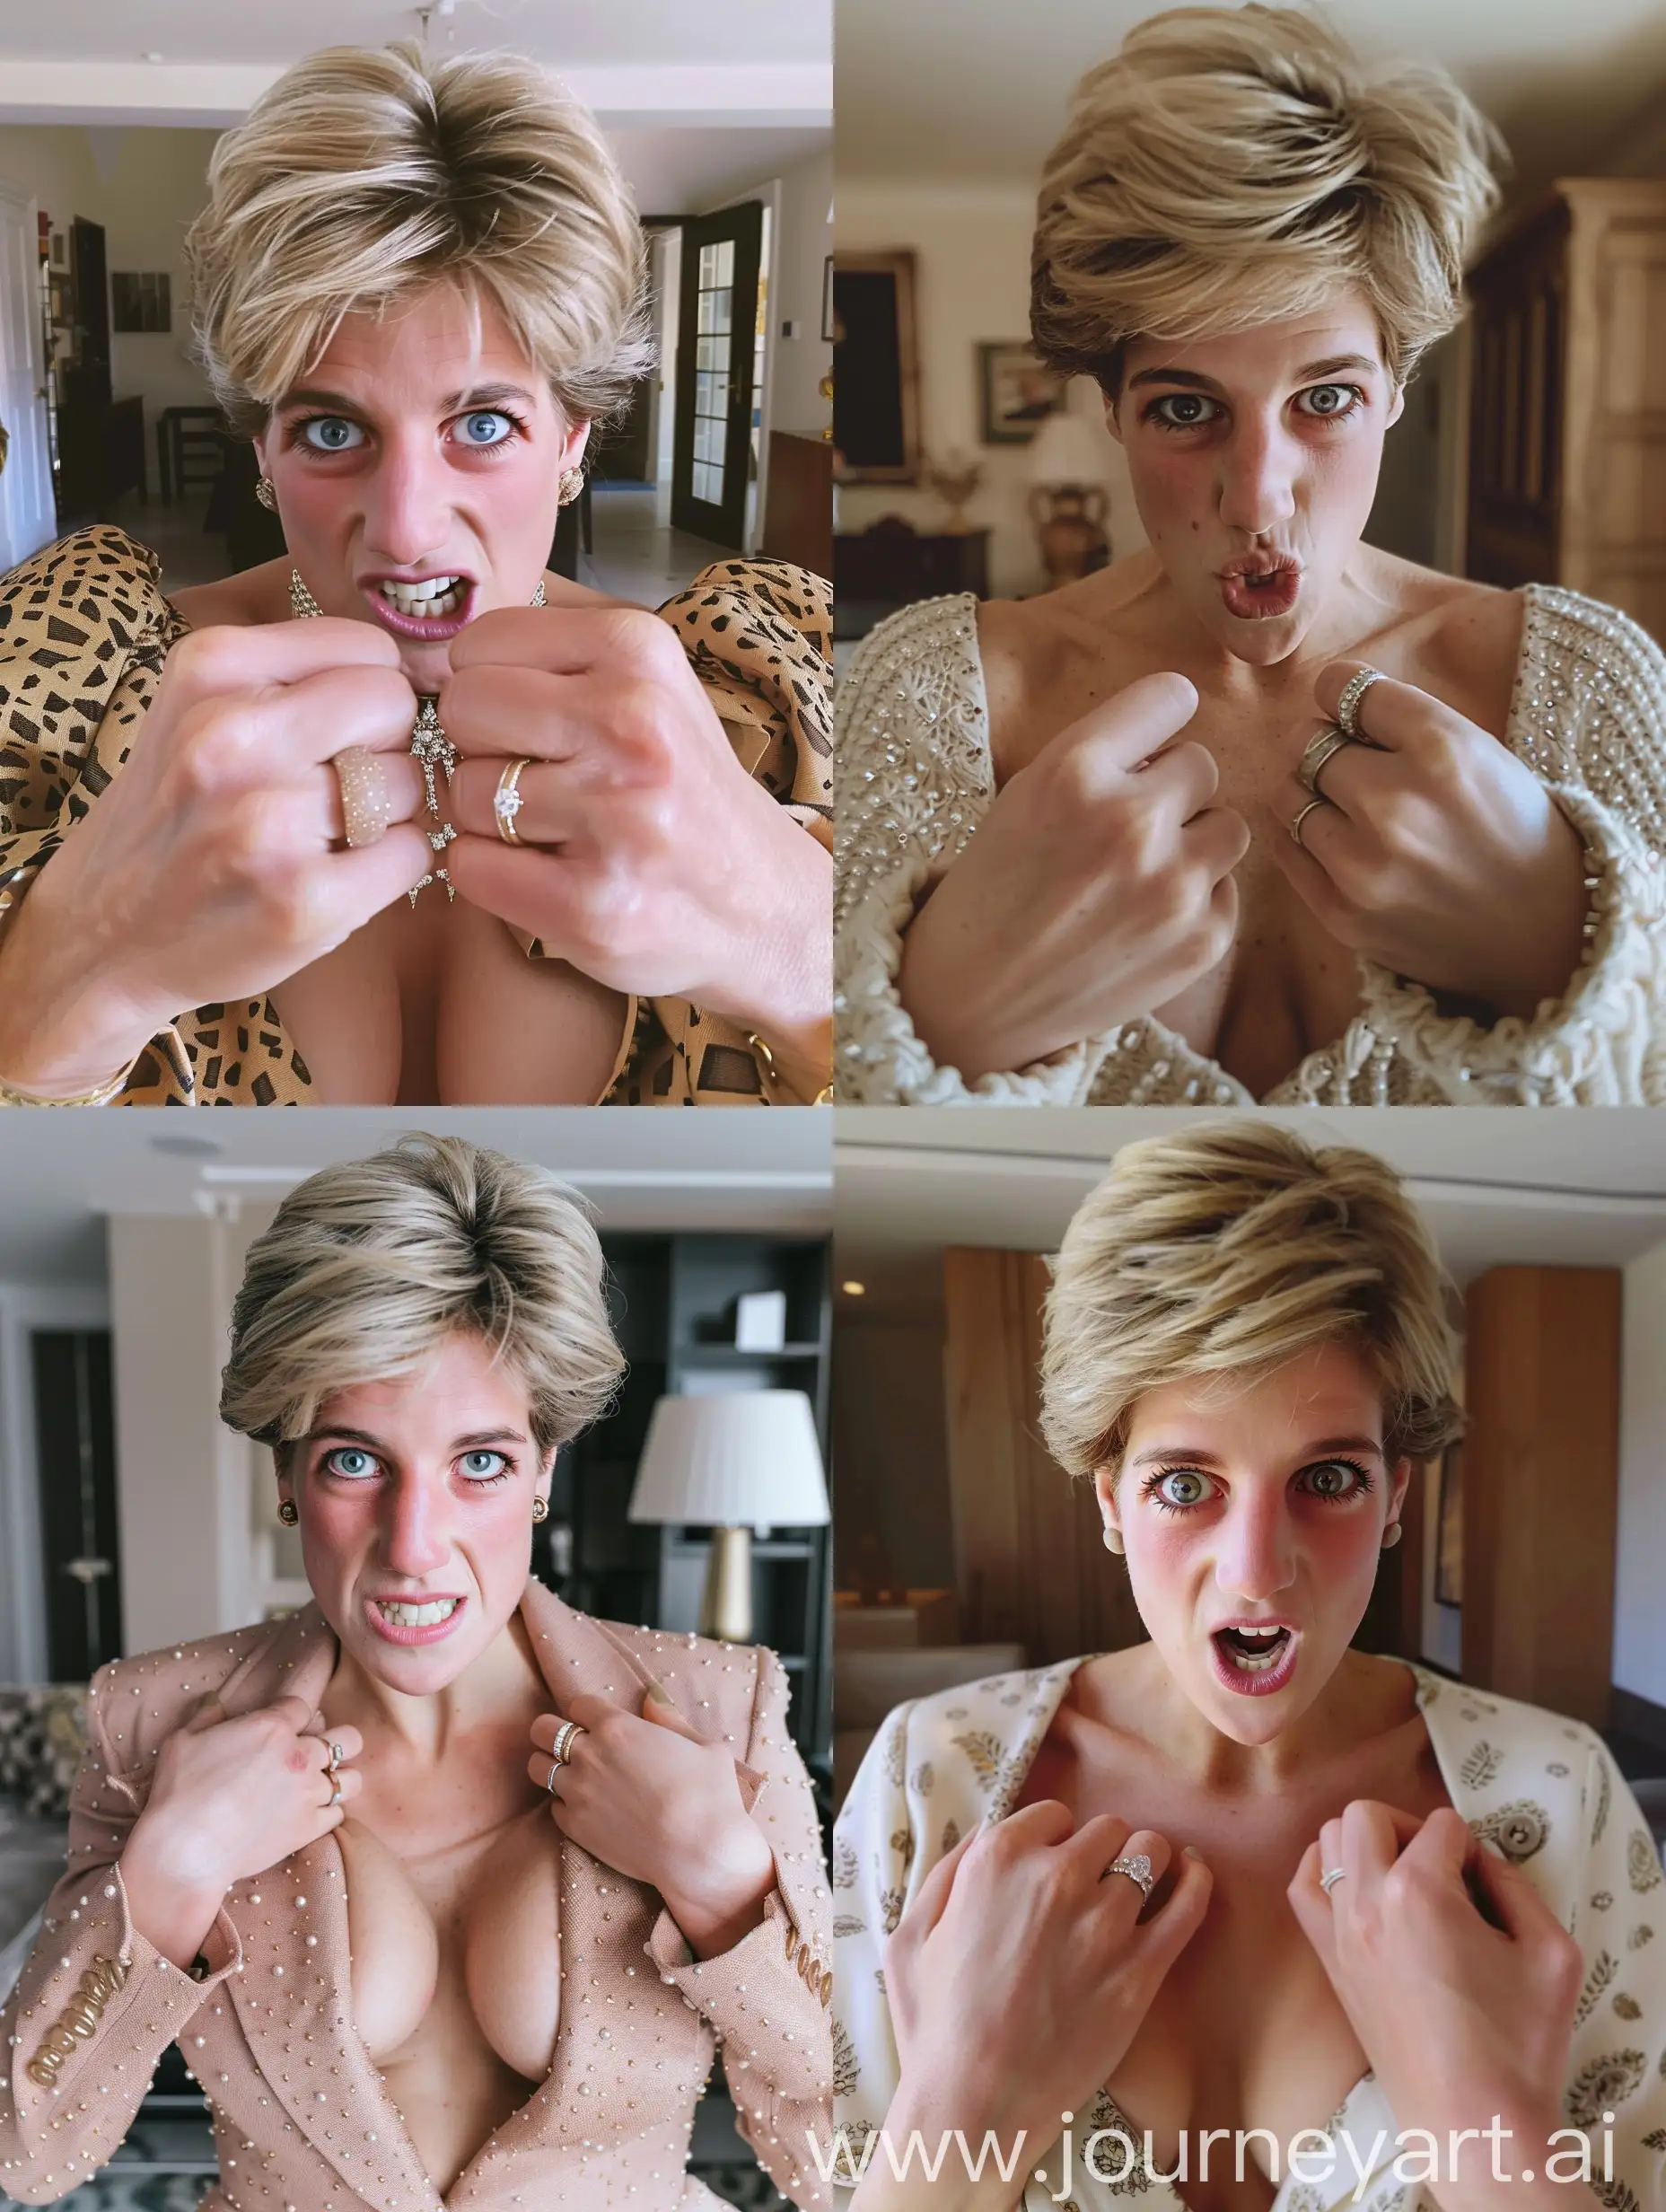 Aesthetic Instagram selfie of princess Diana wearing modern clothes, in a modern London flat, close up selfie, manicured, beige gel nail polish, hands low gripping big chest, rings, making a very funny face